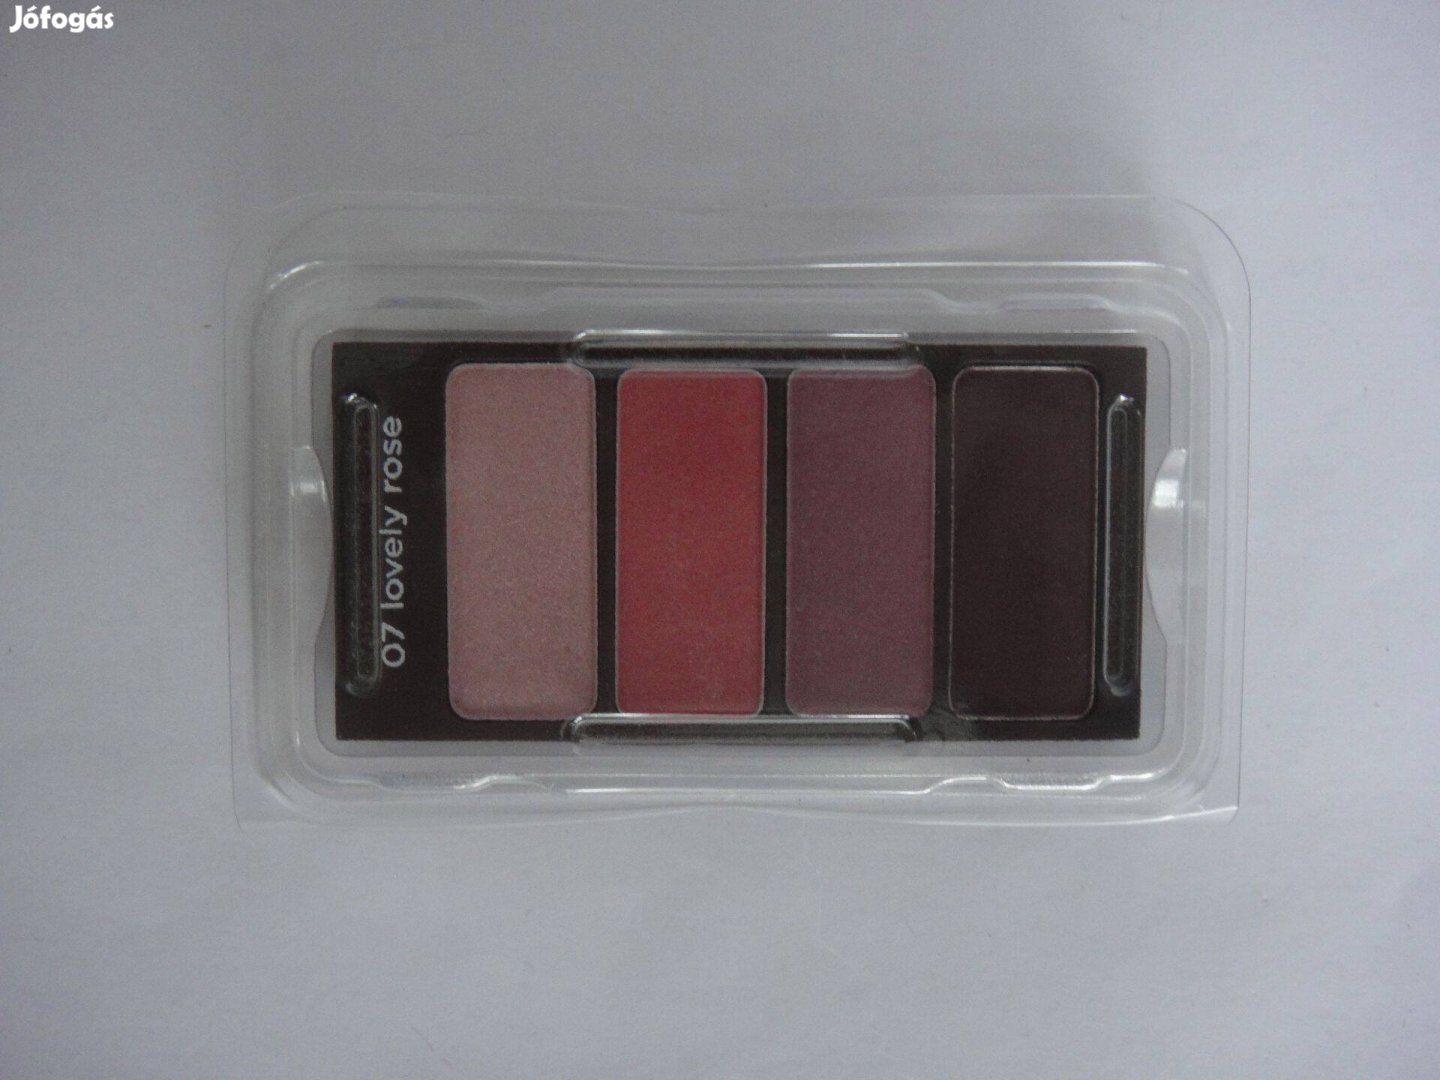 Clarins 4-Colour Eyeshadow Palette 07 Lovely Rose